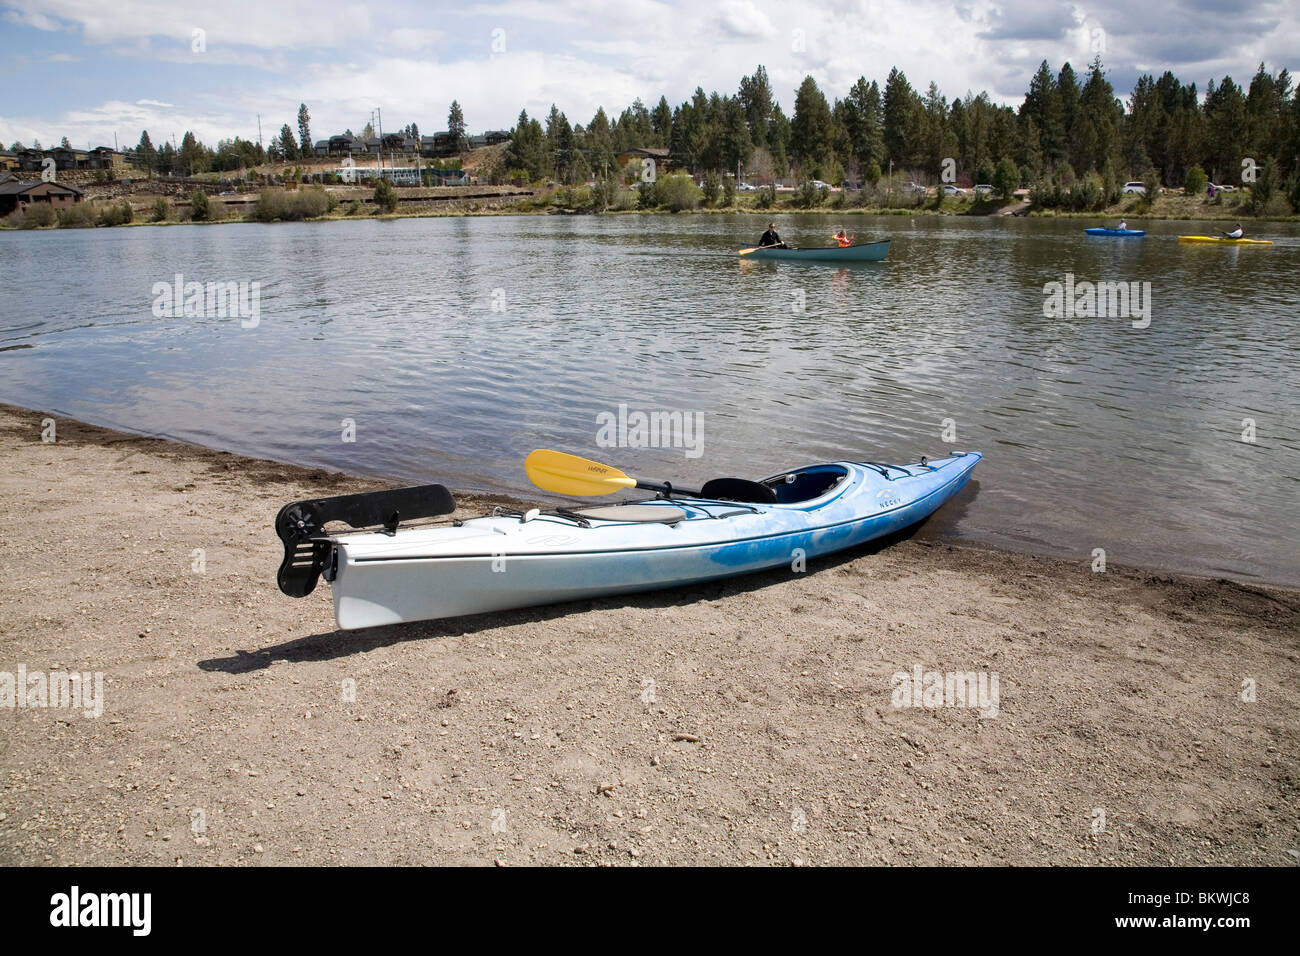 A kayak on a sandy beach on the Deschutes River in Bend, Oregon Stock Photo